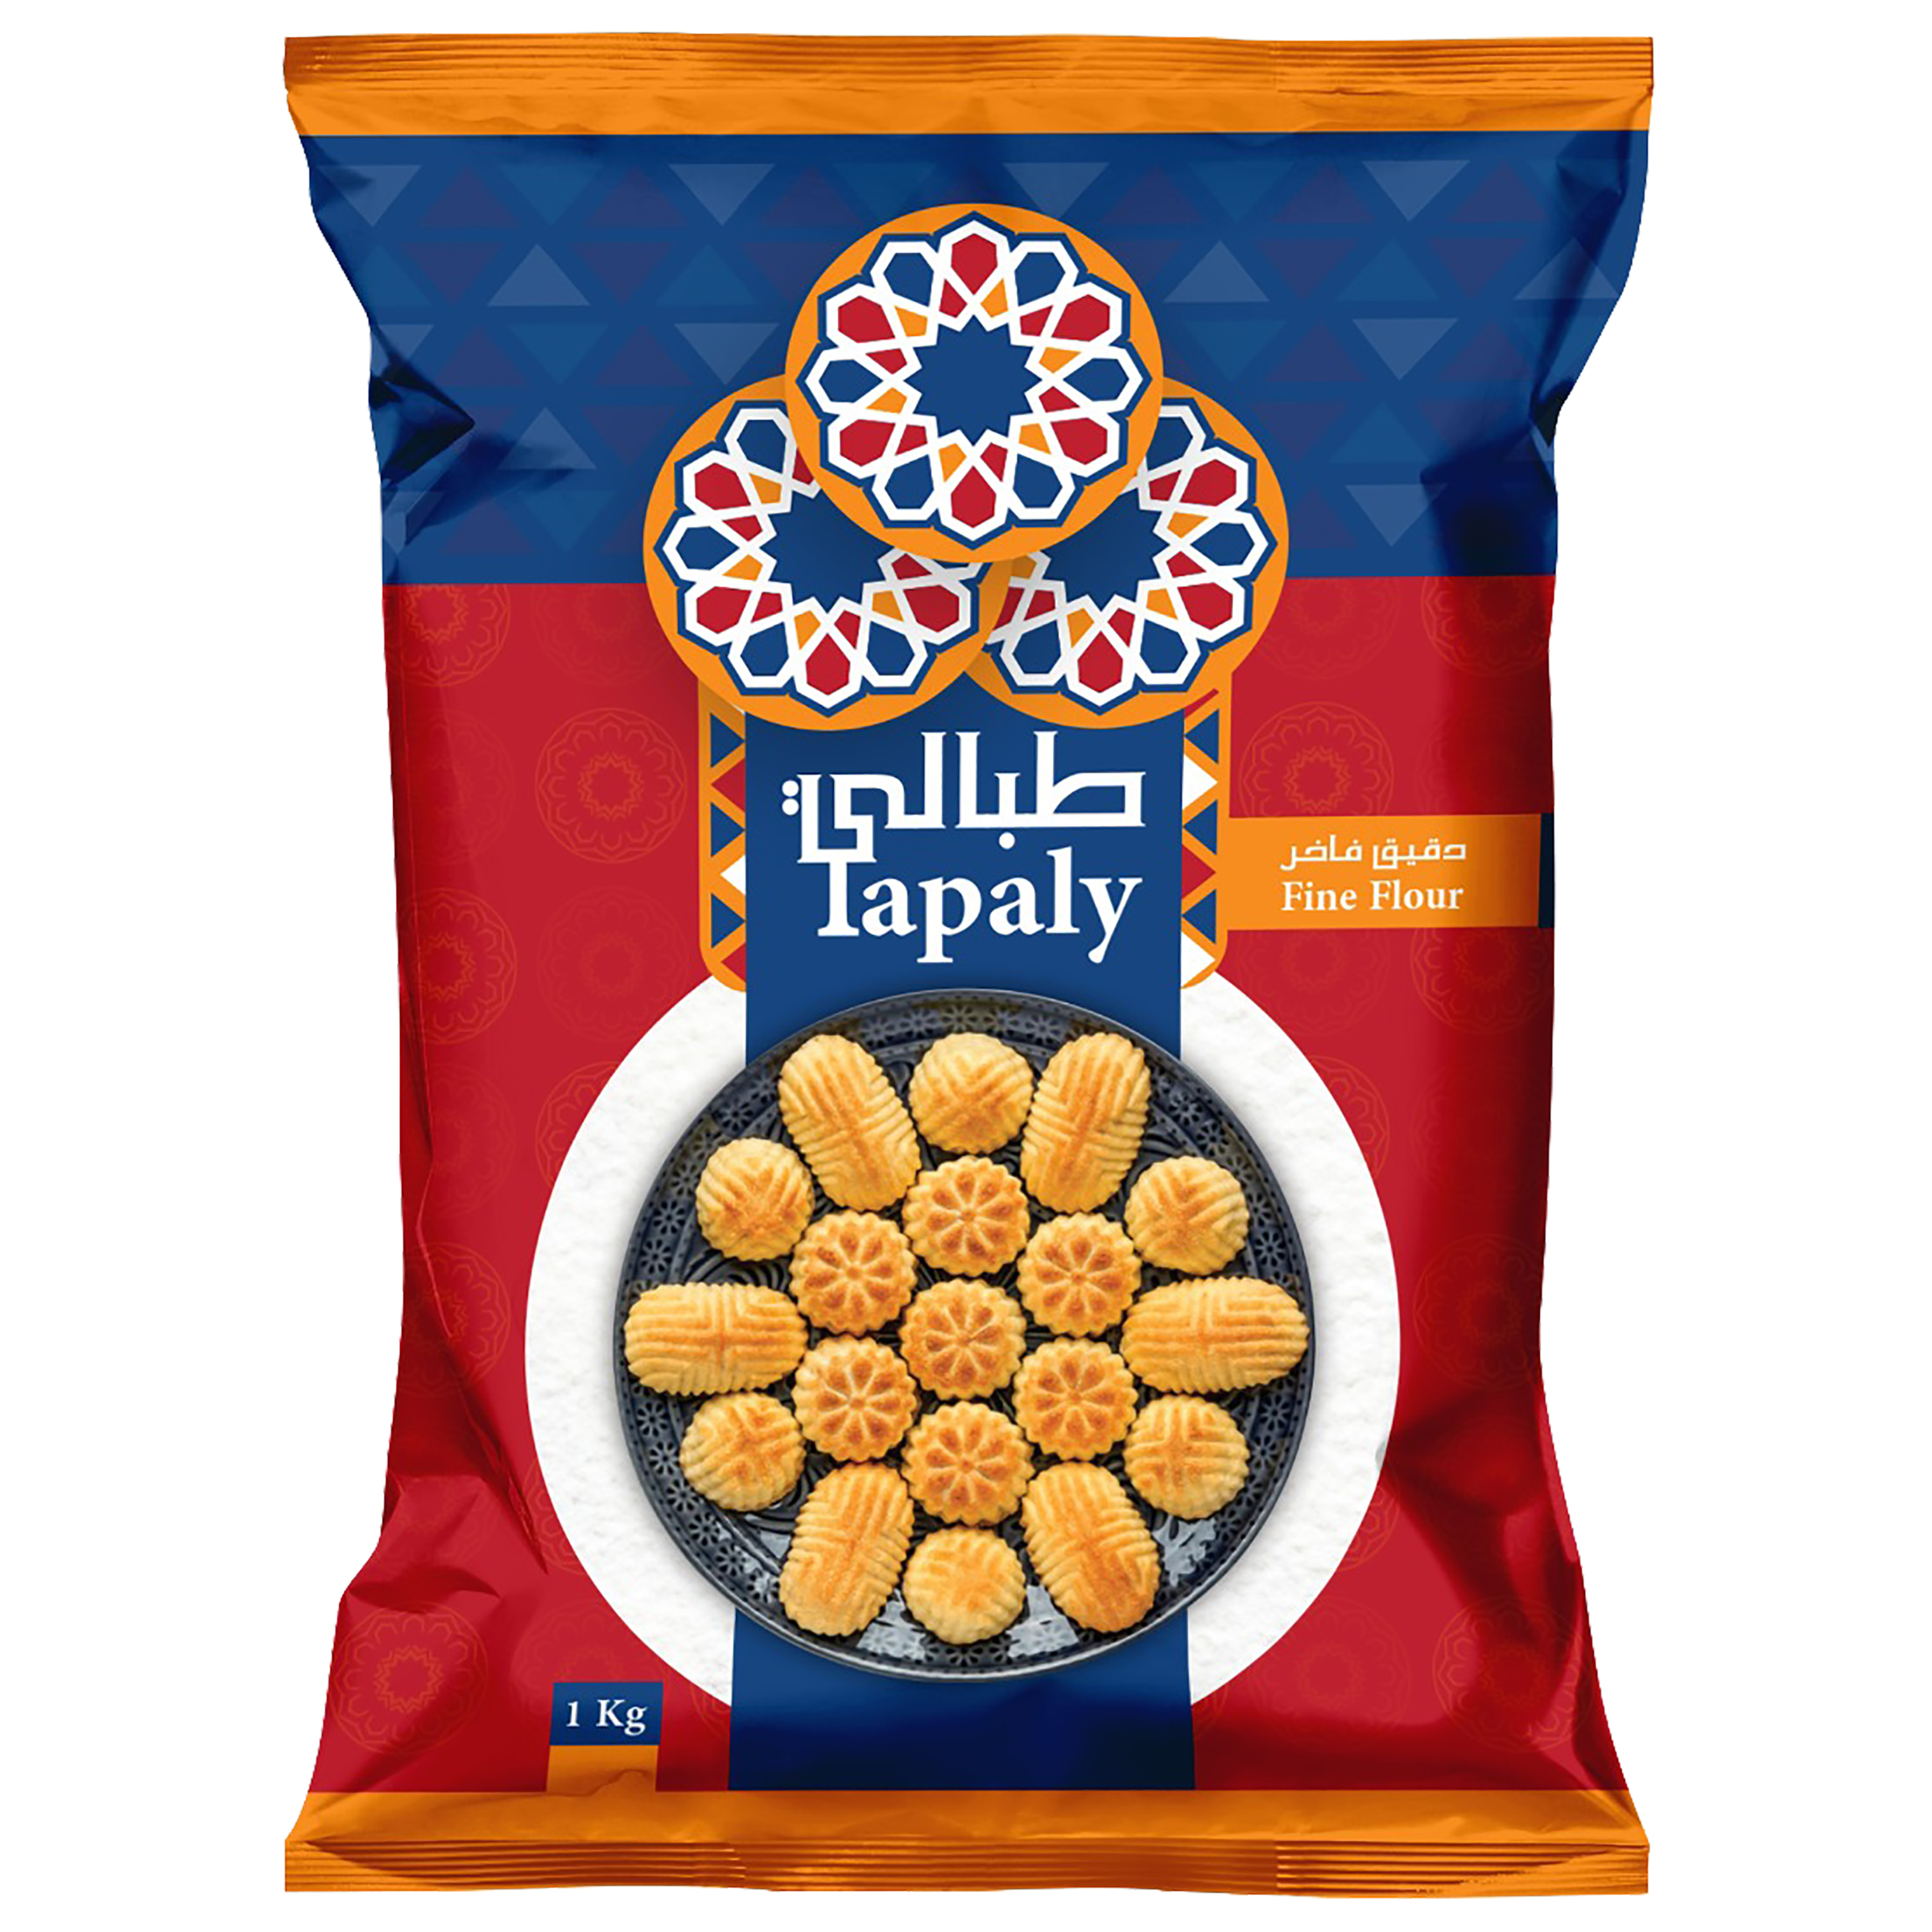 Tapaly Excellent Flour 1 Kg